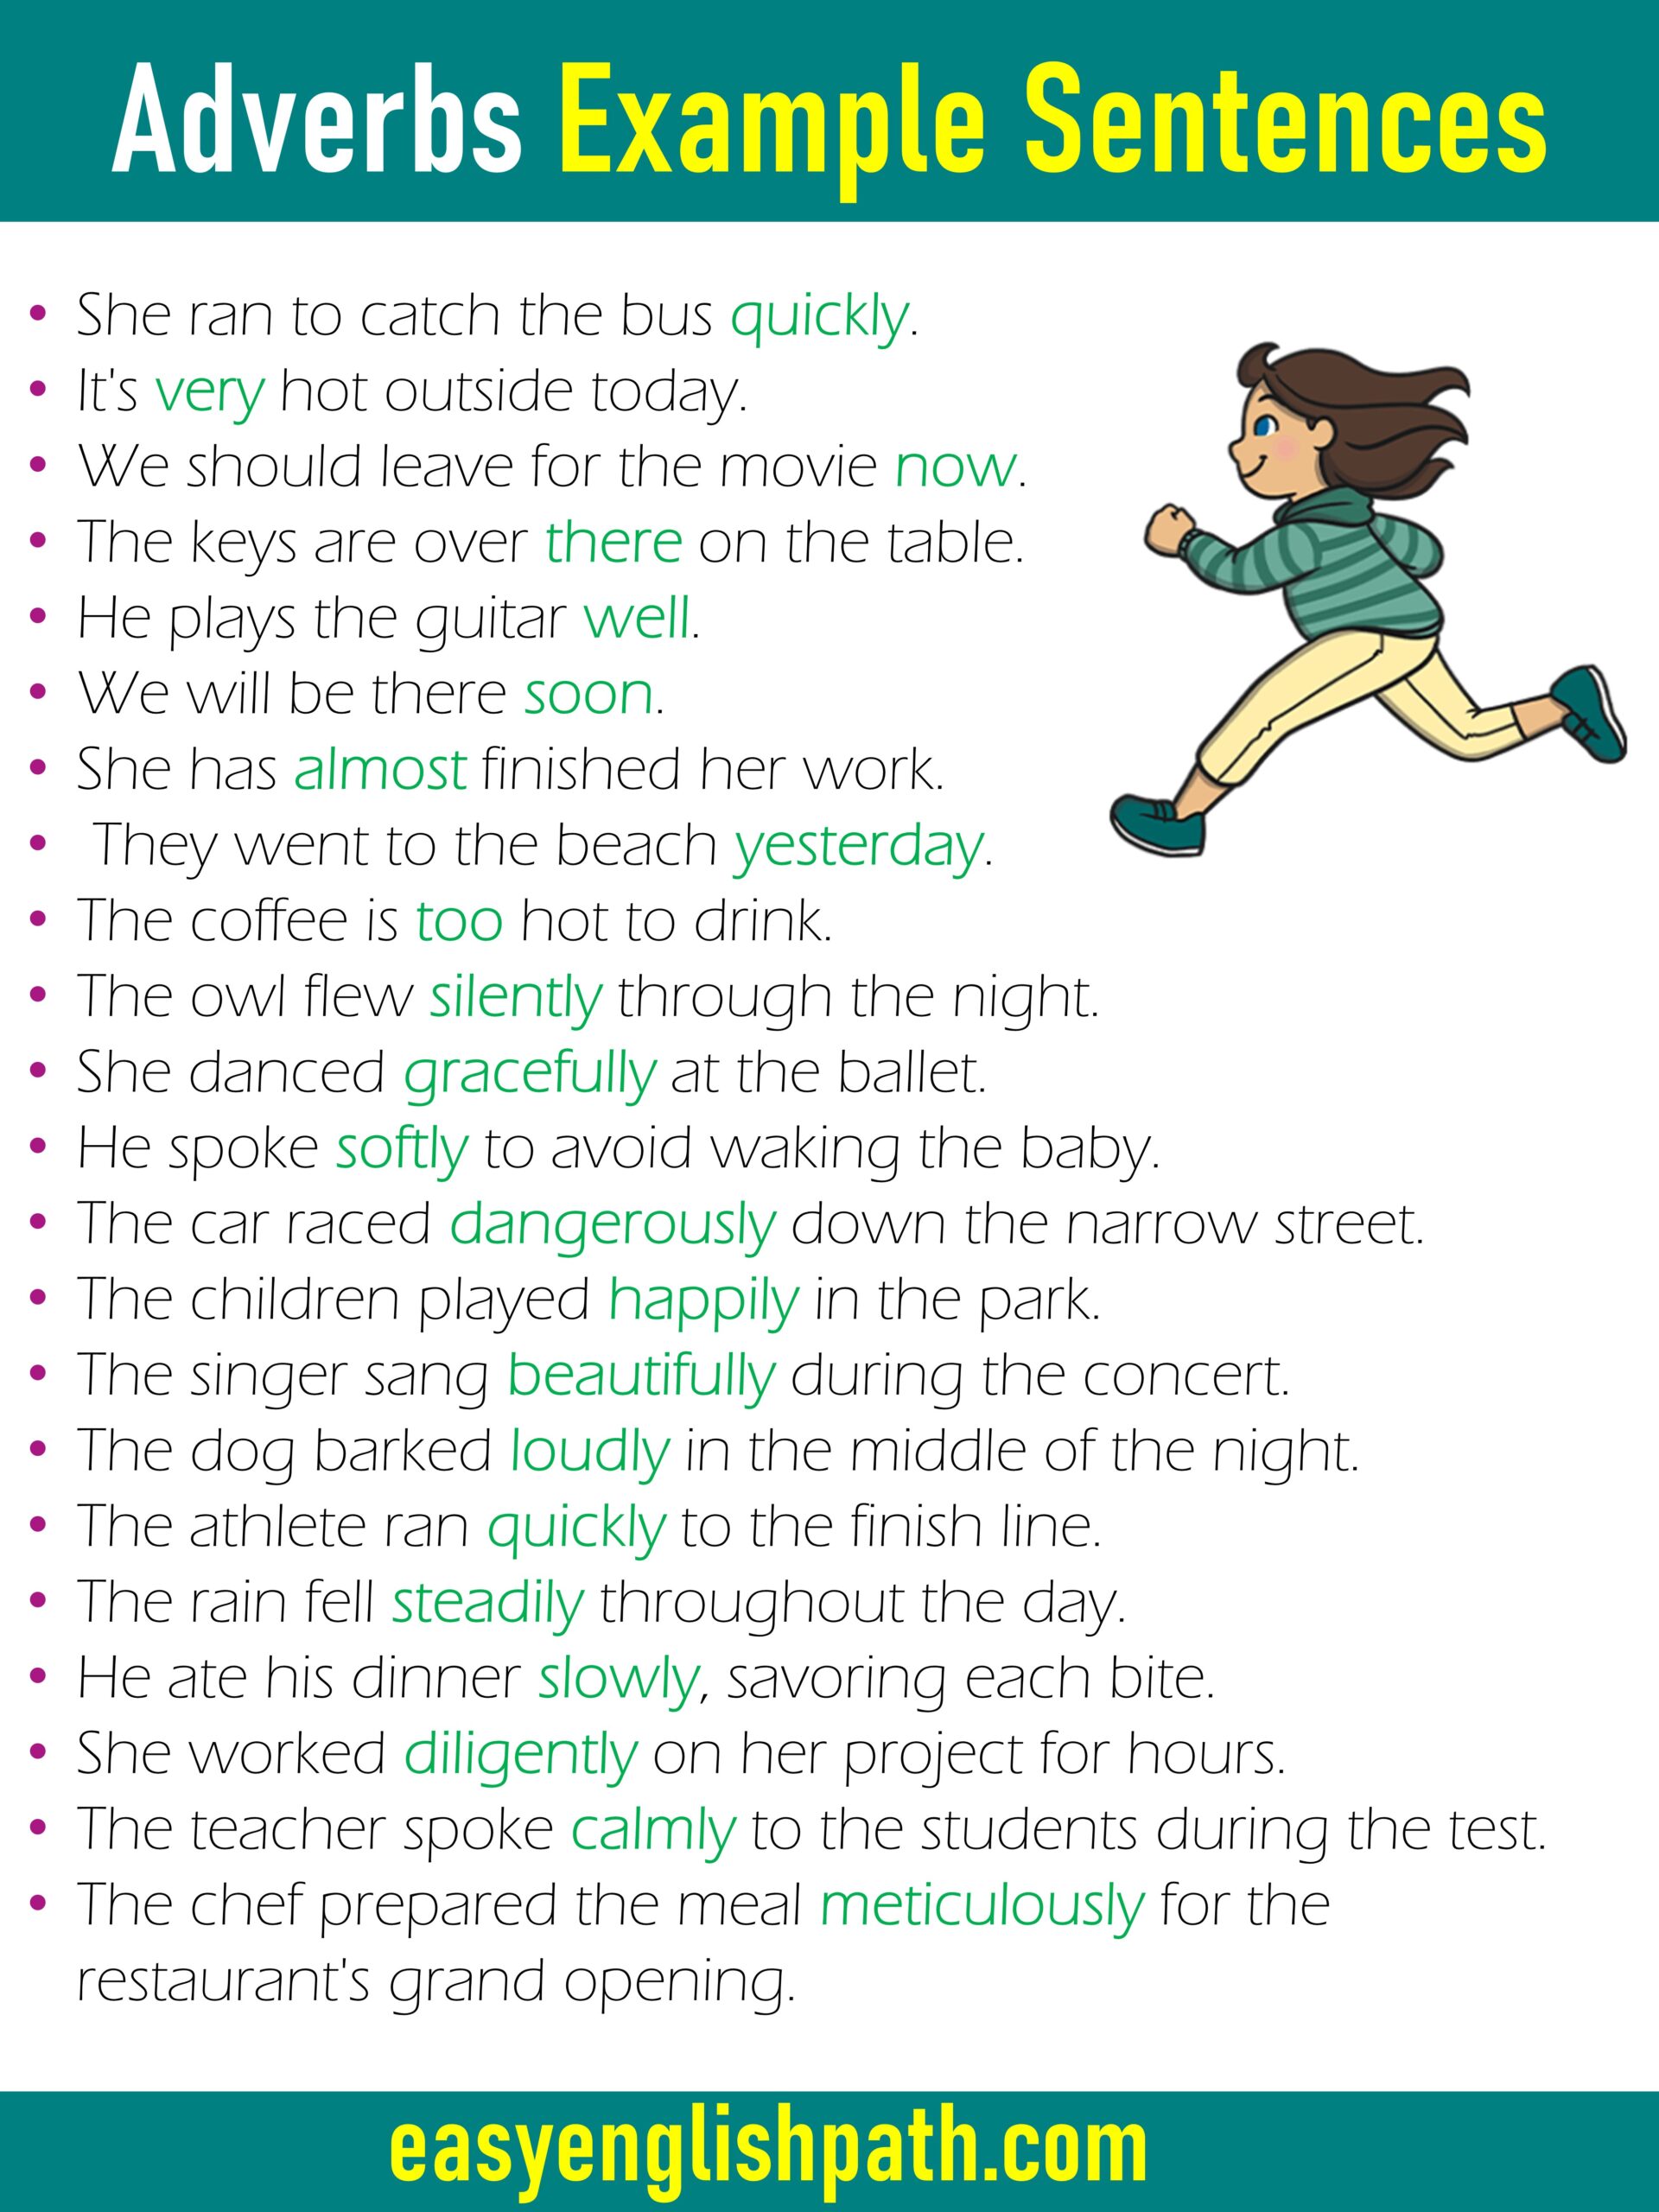 Adverb Example Sentences in English